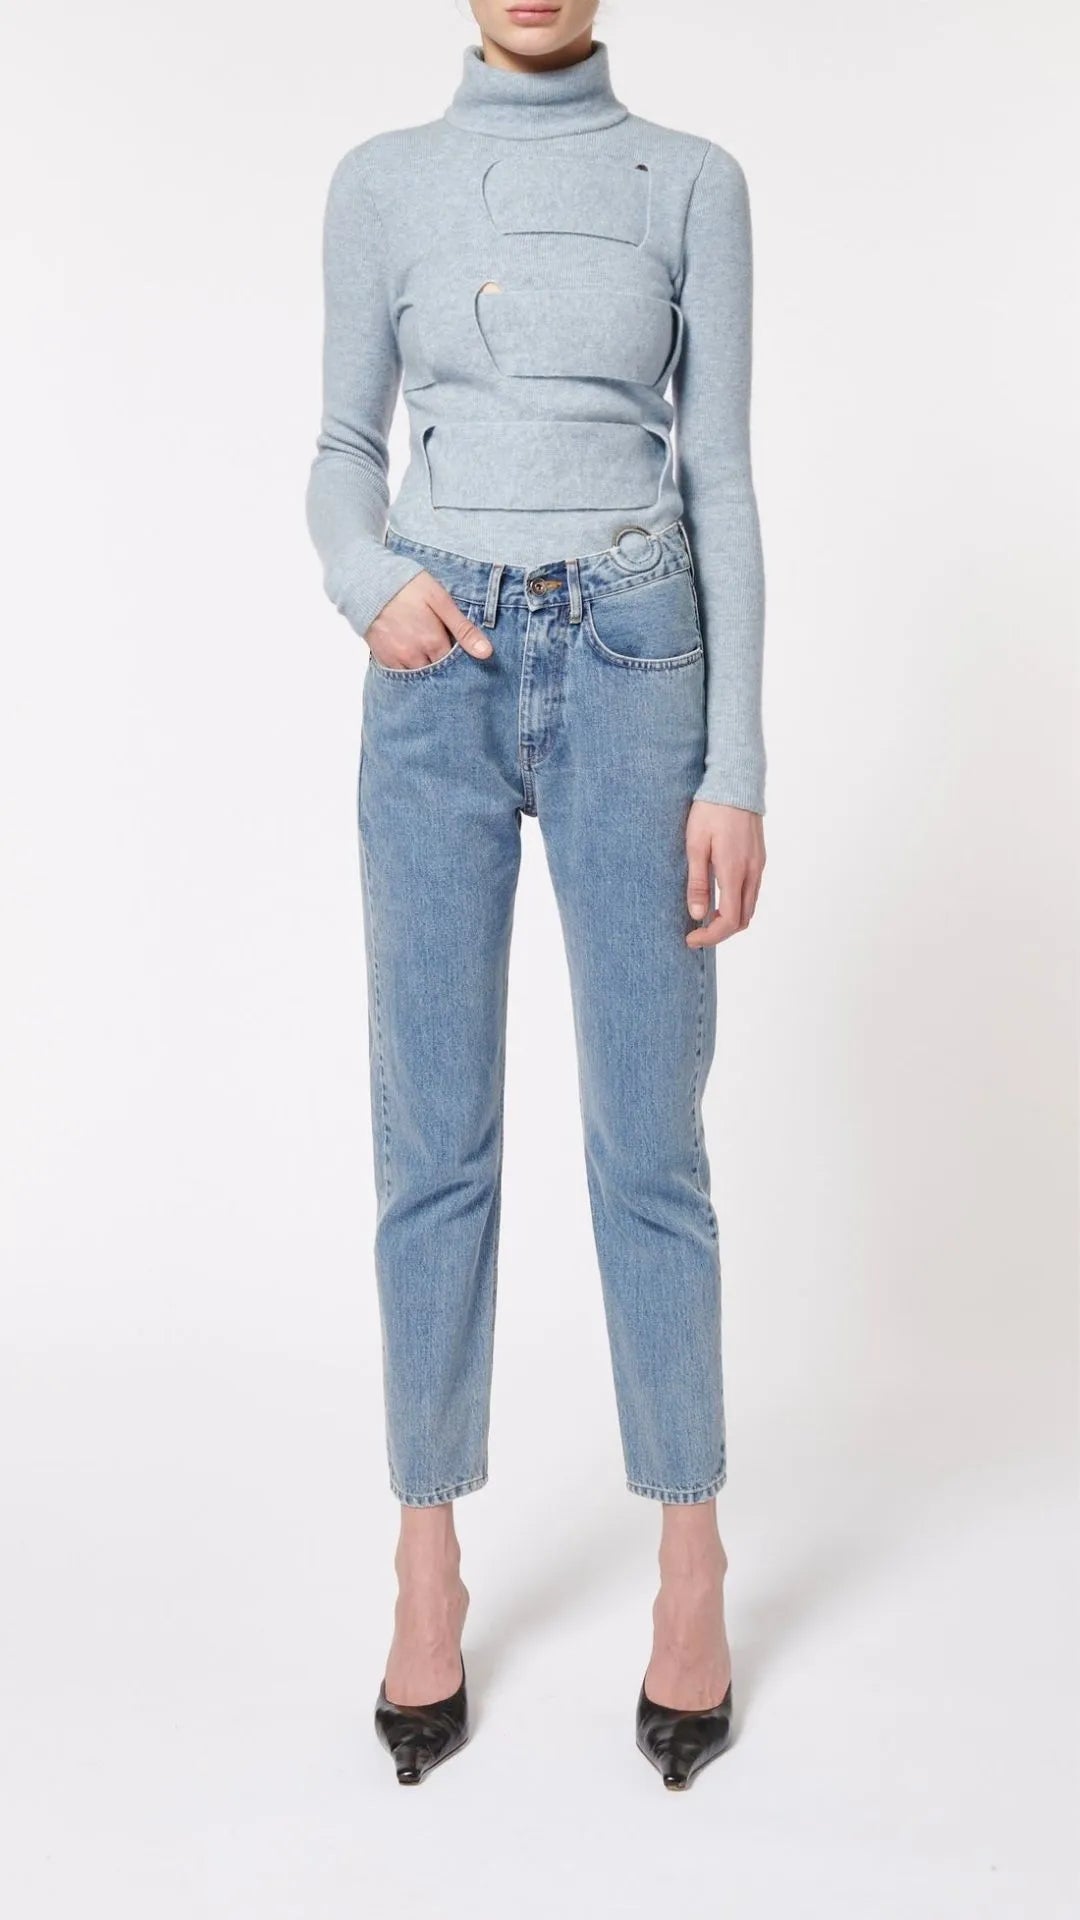 Boyarovskaya Slim Ring Jean. Light color stone denim with a slightly tapered leg and falls to just above the ankle. Zipper closure with silver ring detail on the front right. Product shown on model facing front.